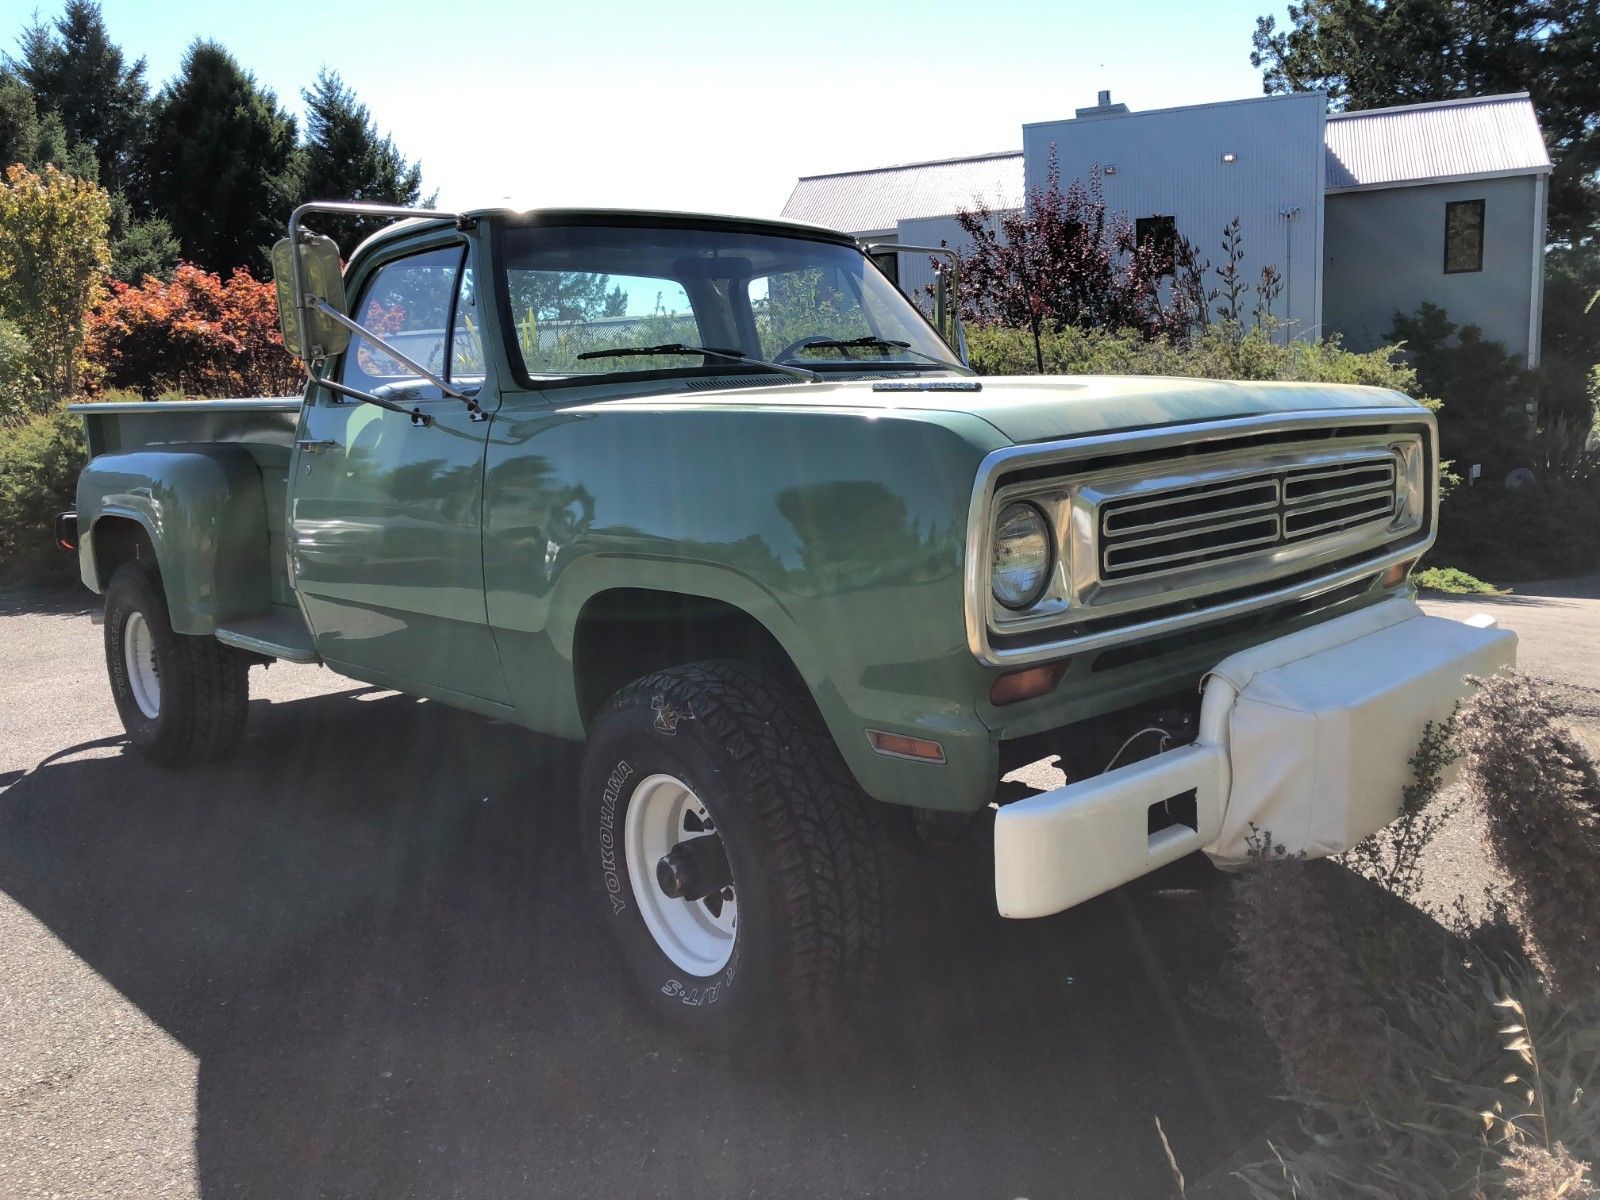 The Woodsman: This 1972 ex-Forest Service Dodge Power Wagon Is An Awesome Workhorse